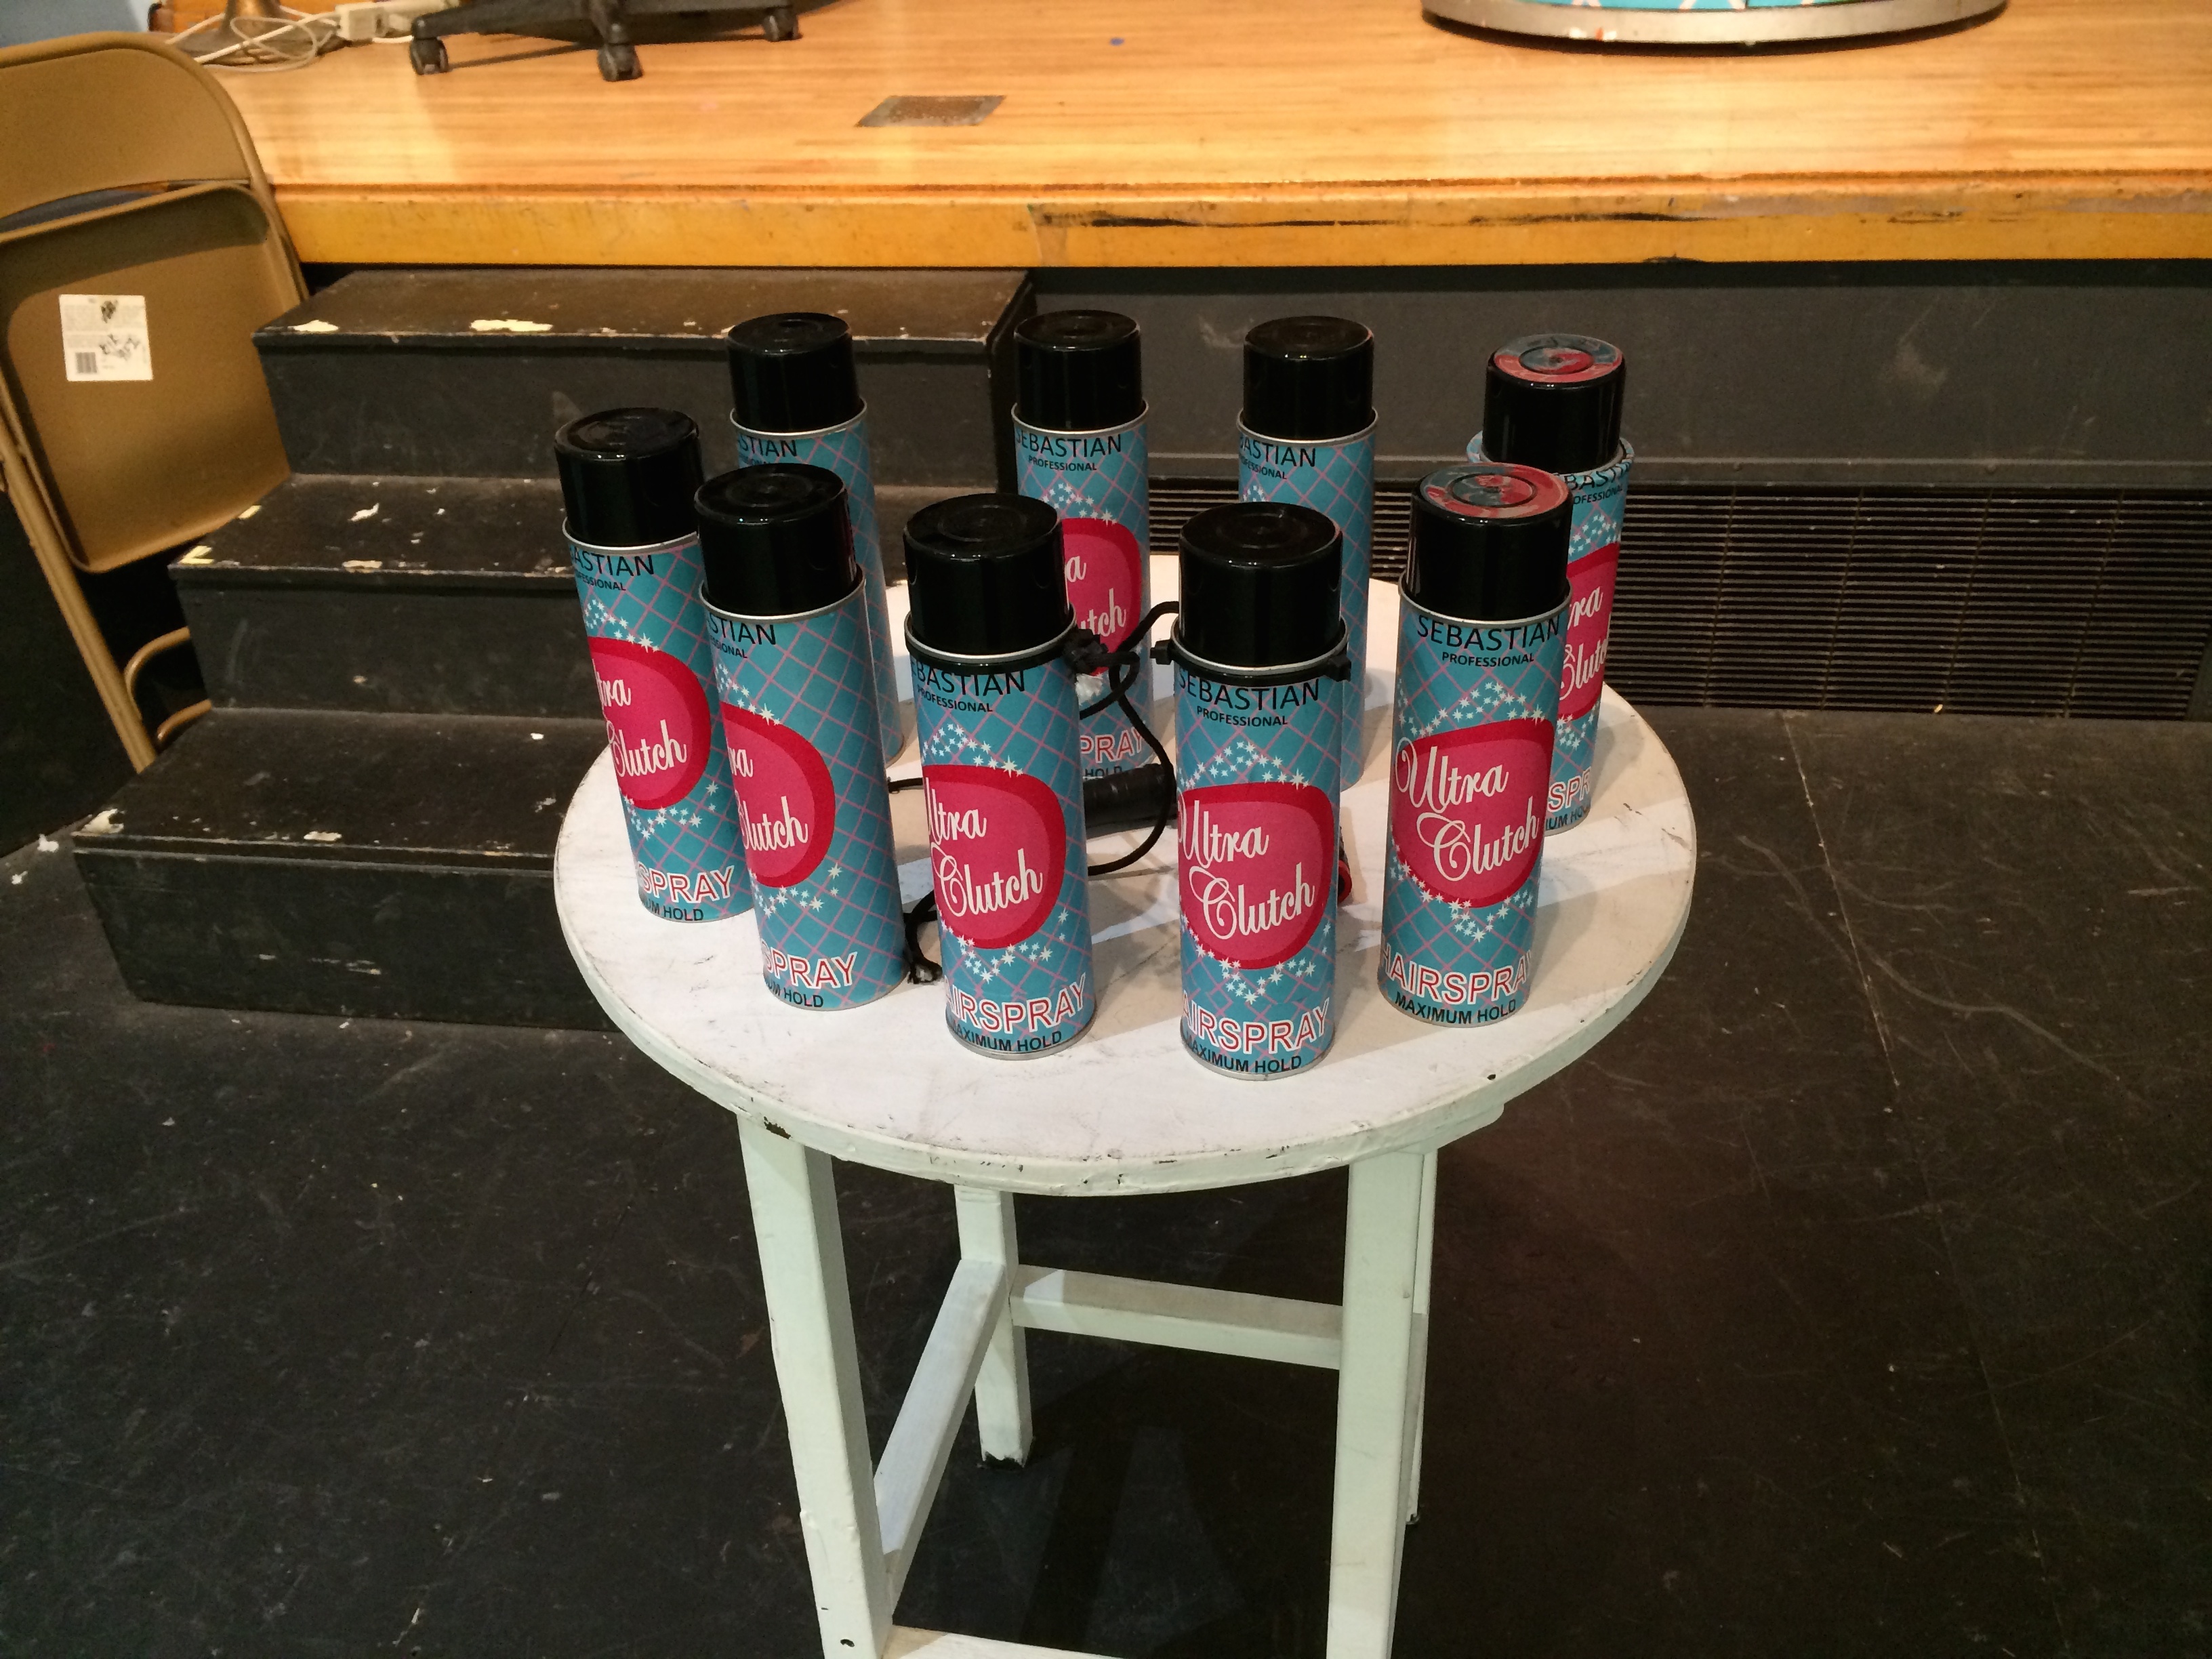 Hairspray small cans